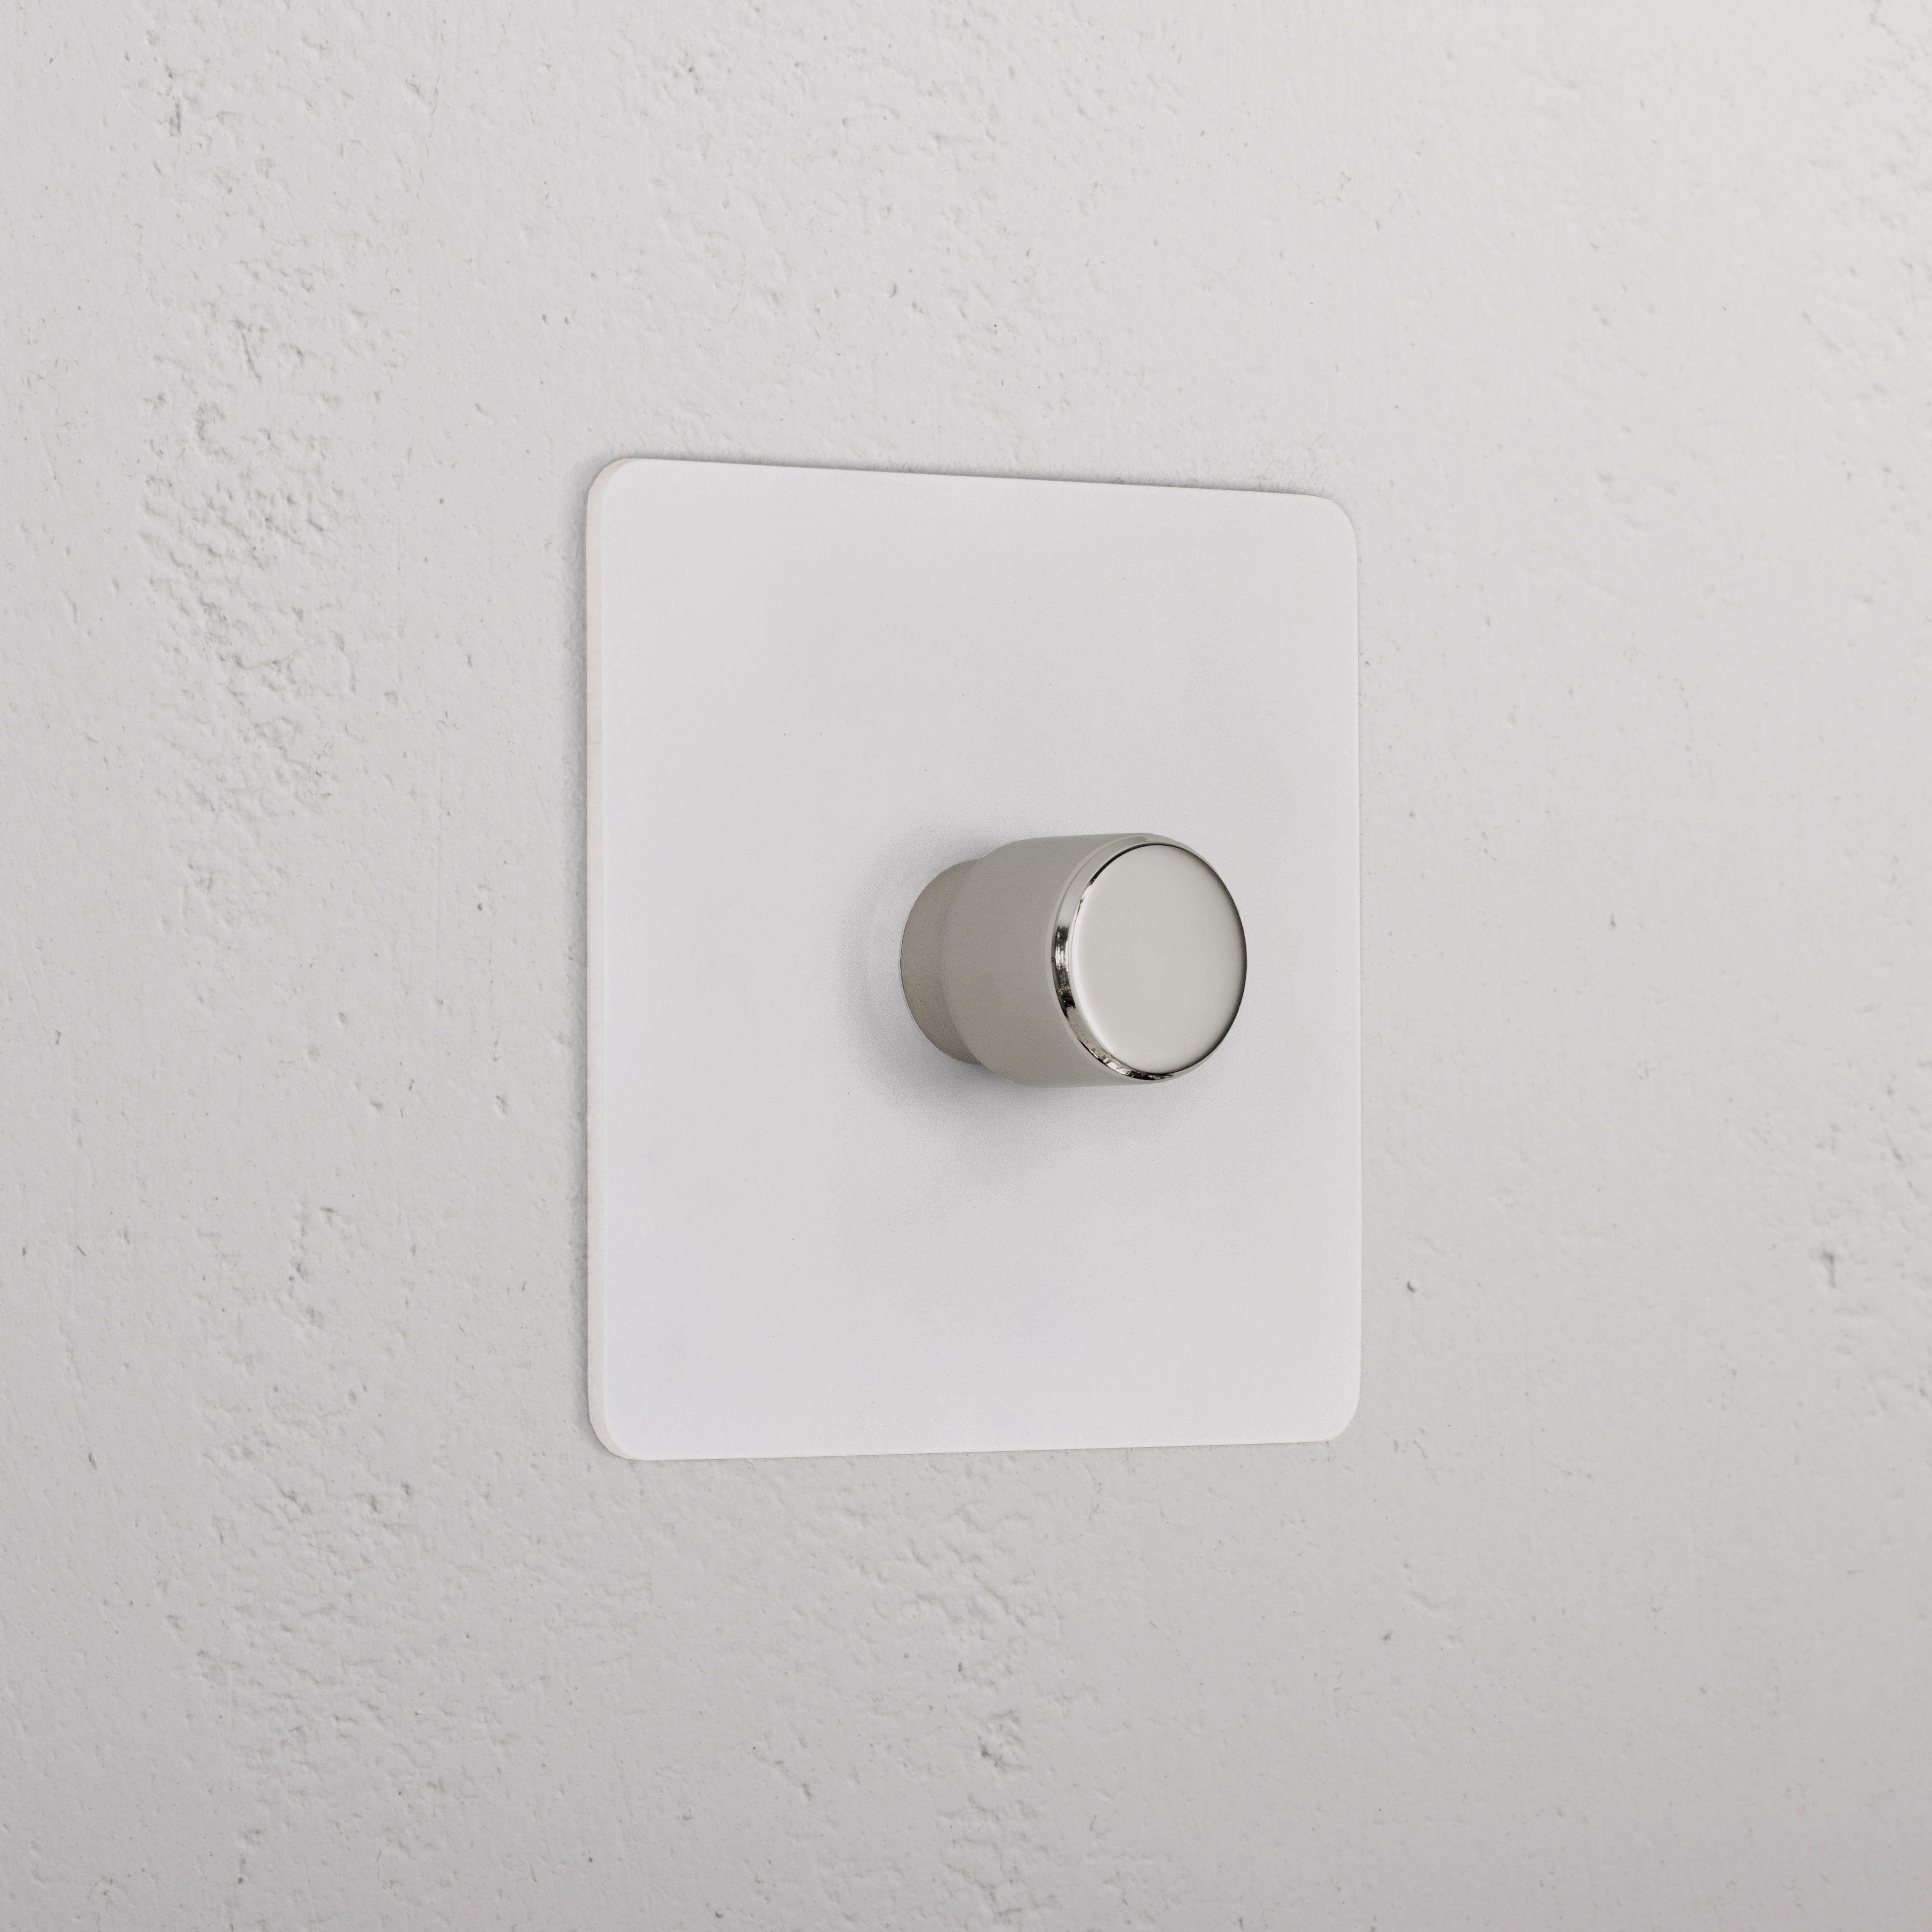 1G Two Way Dimmer Switch - Paintable Polished Nickel